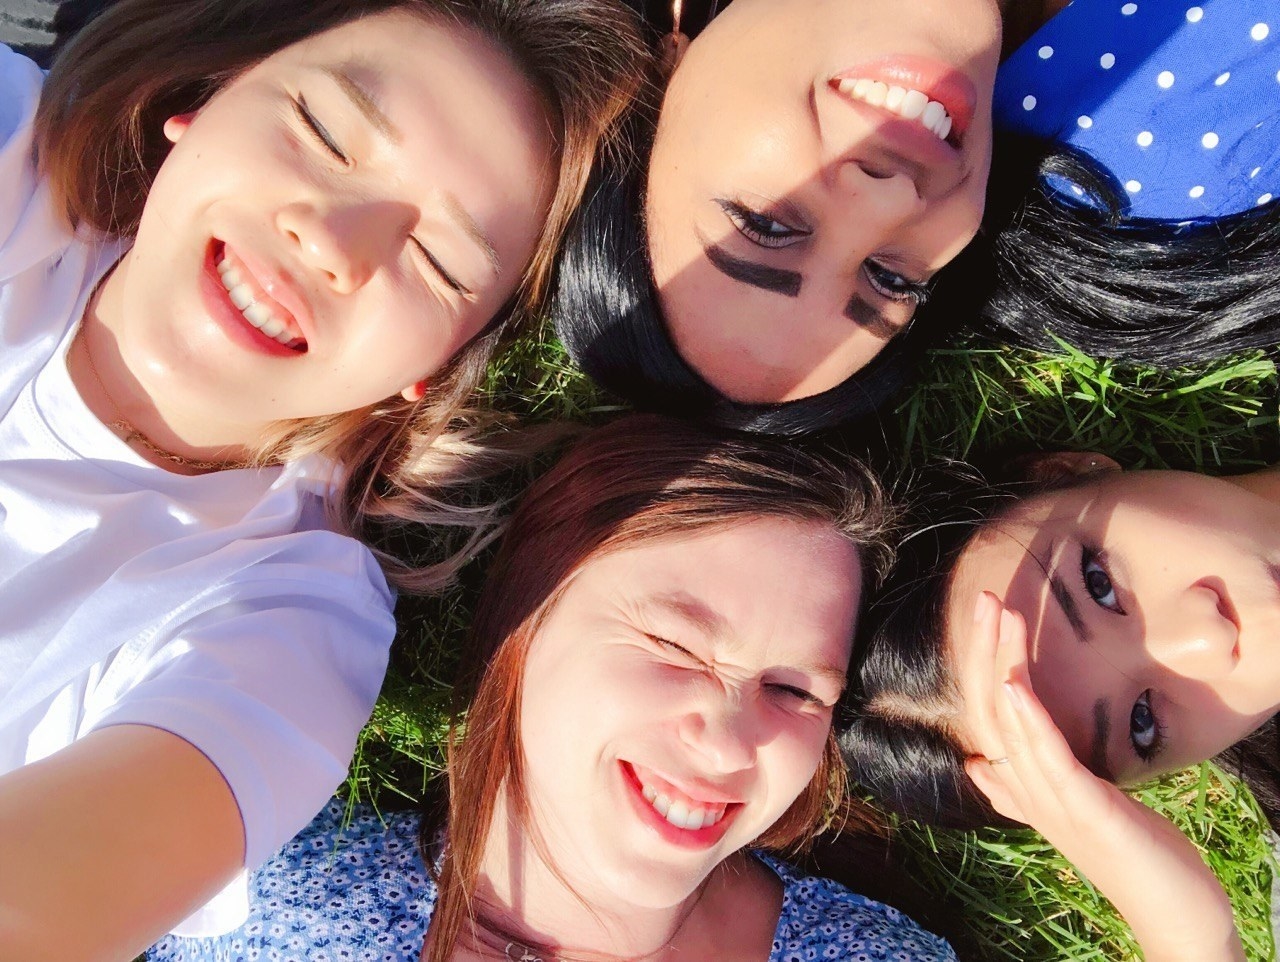 Young women lying on the grass and smiling up at the camera